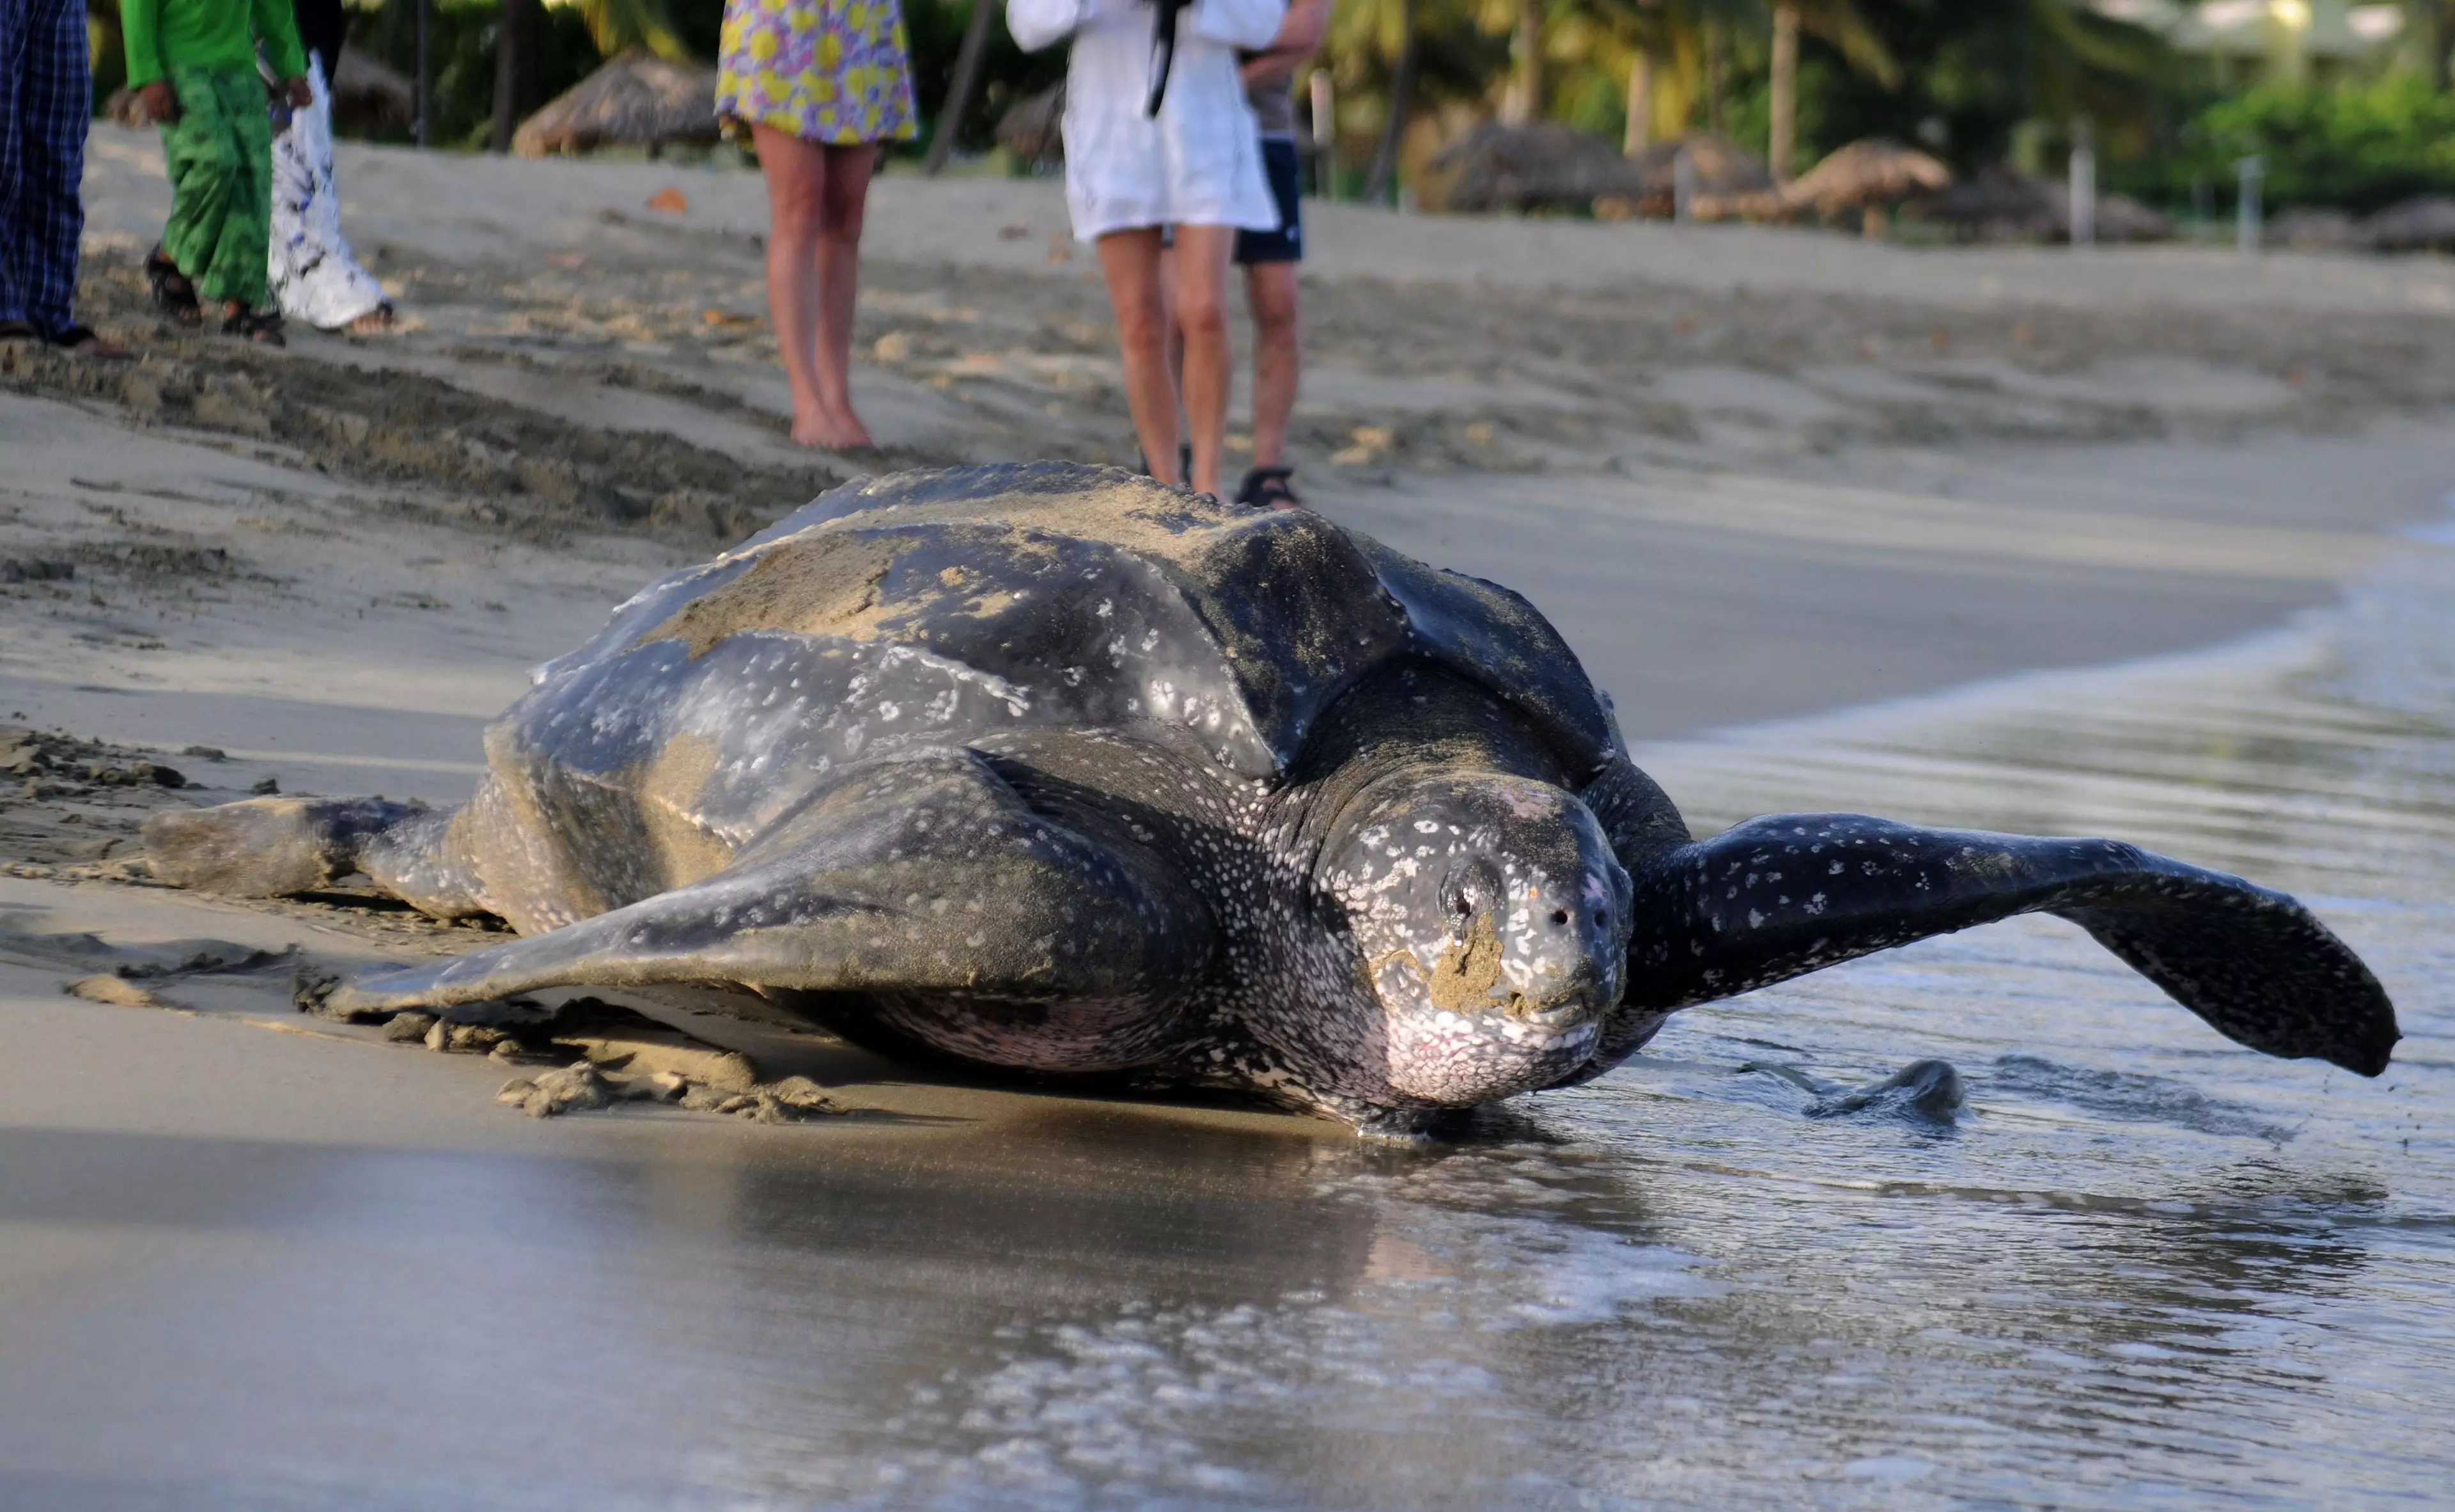 Leatherback sea turtles can grow to more than two metres in length.